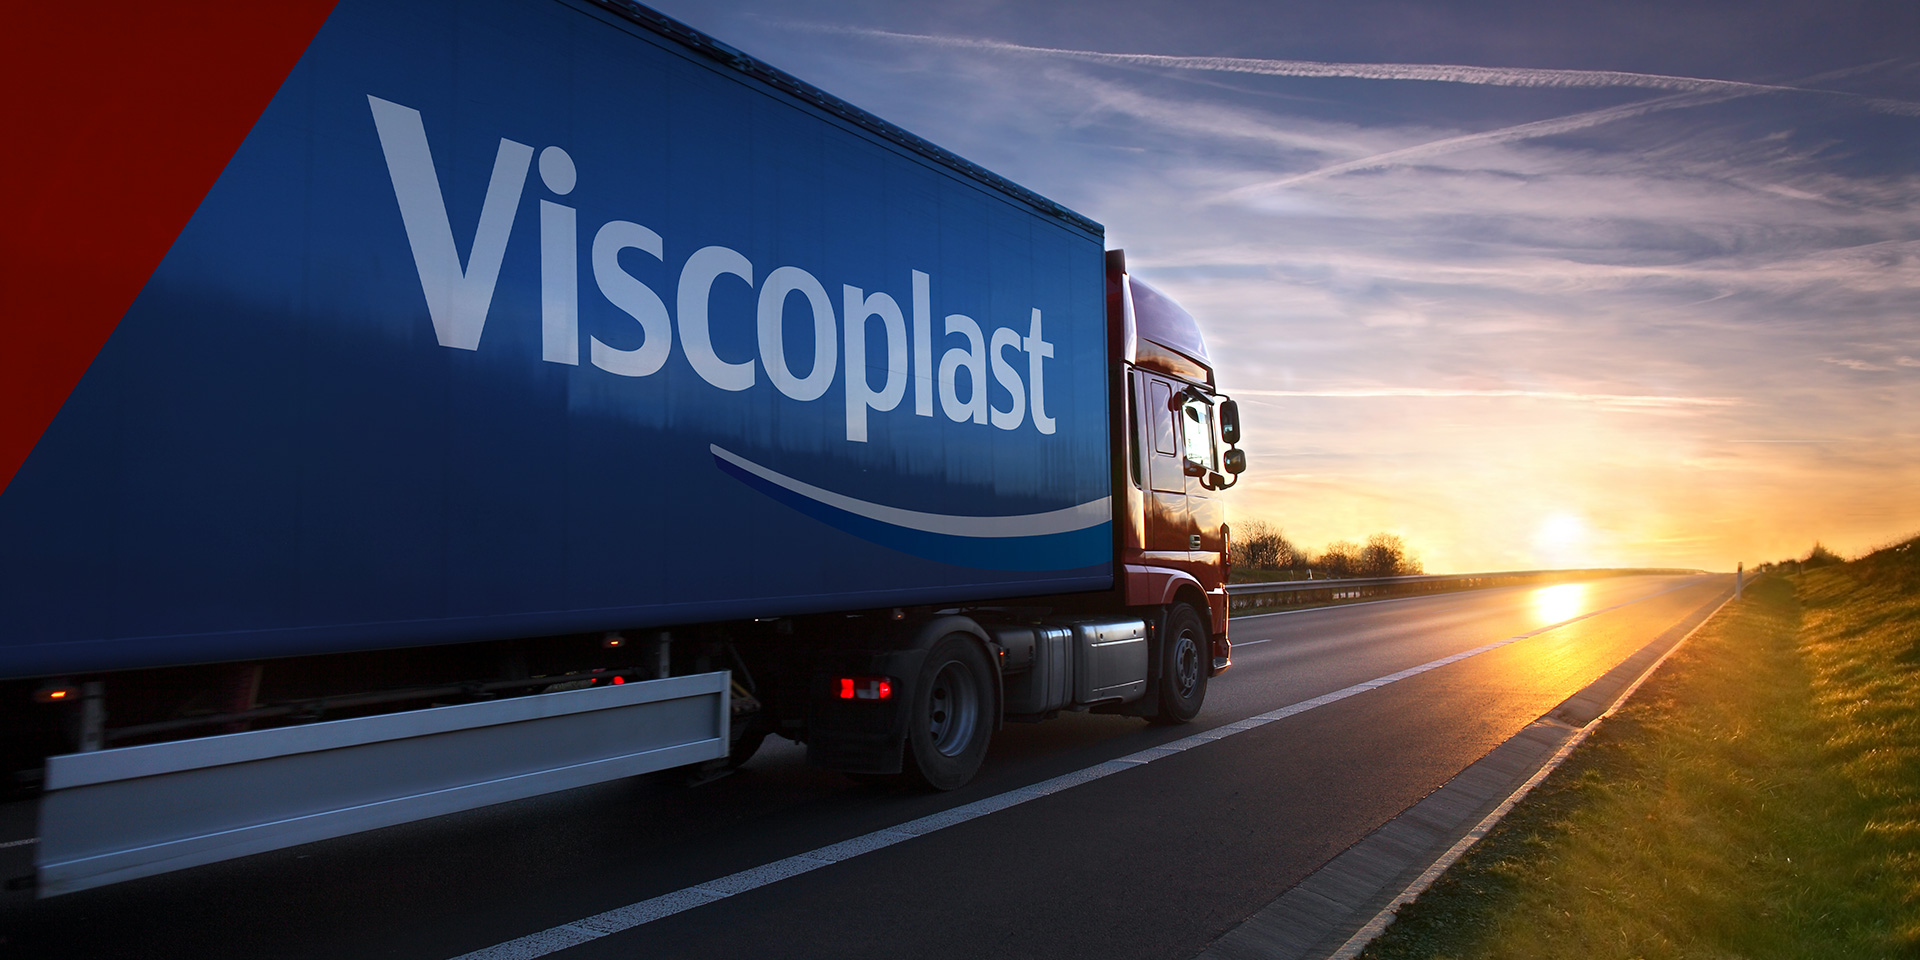 Visual identity of the Viscoplast brand with PND Futura. A truck with the Viscoplast logo.